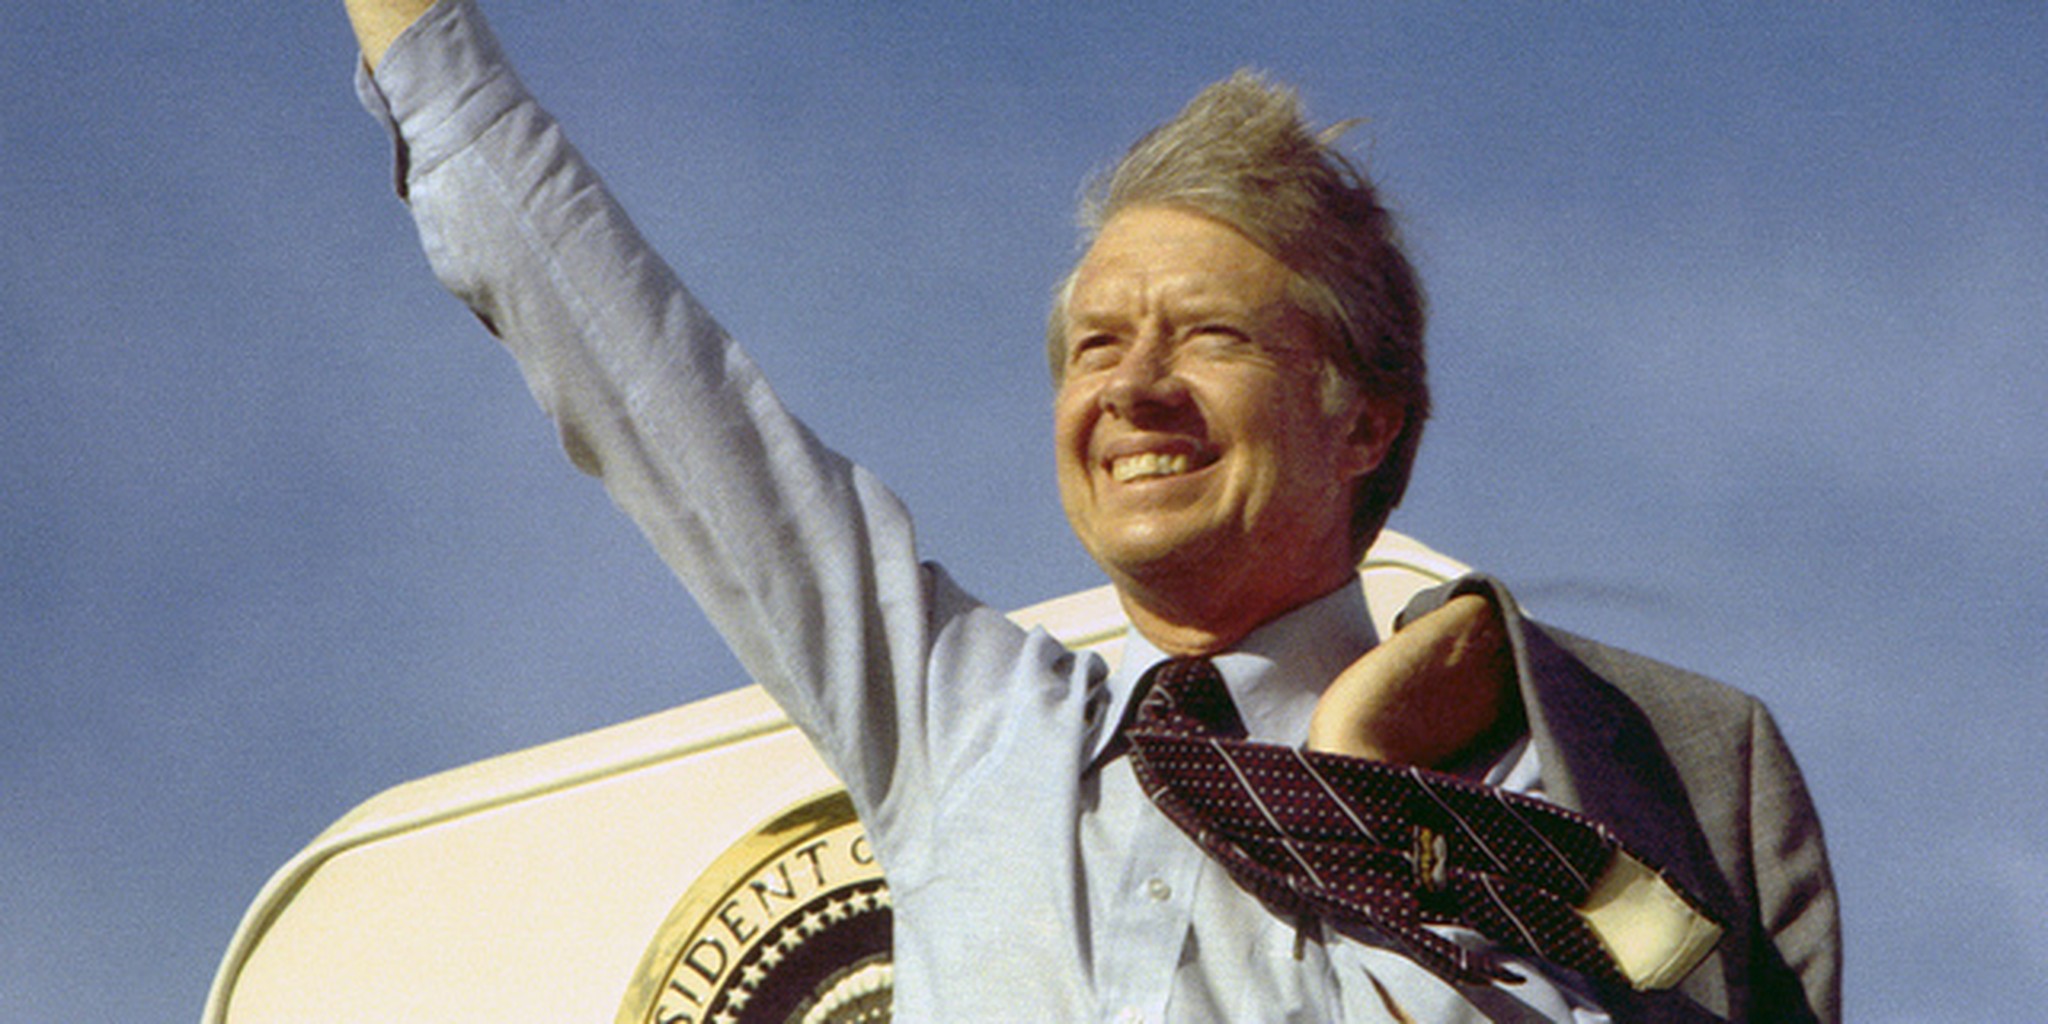 Jimmy Carter is No Angel